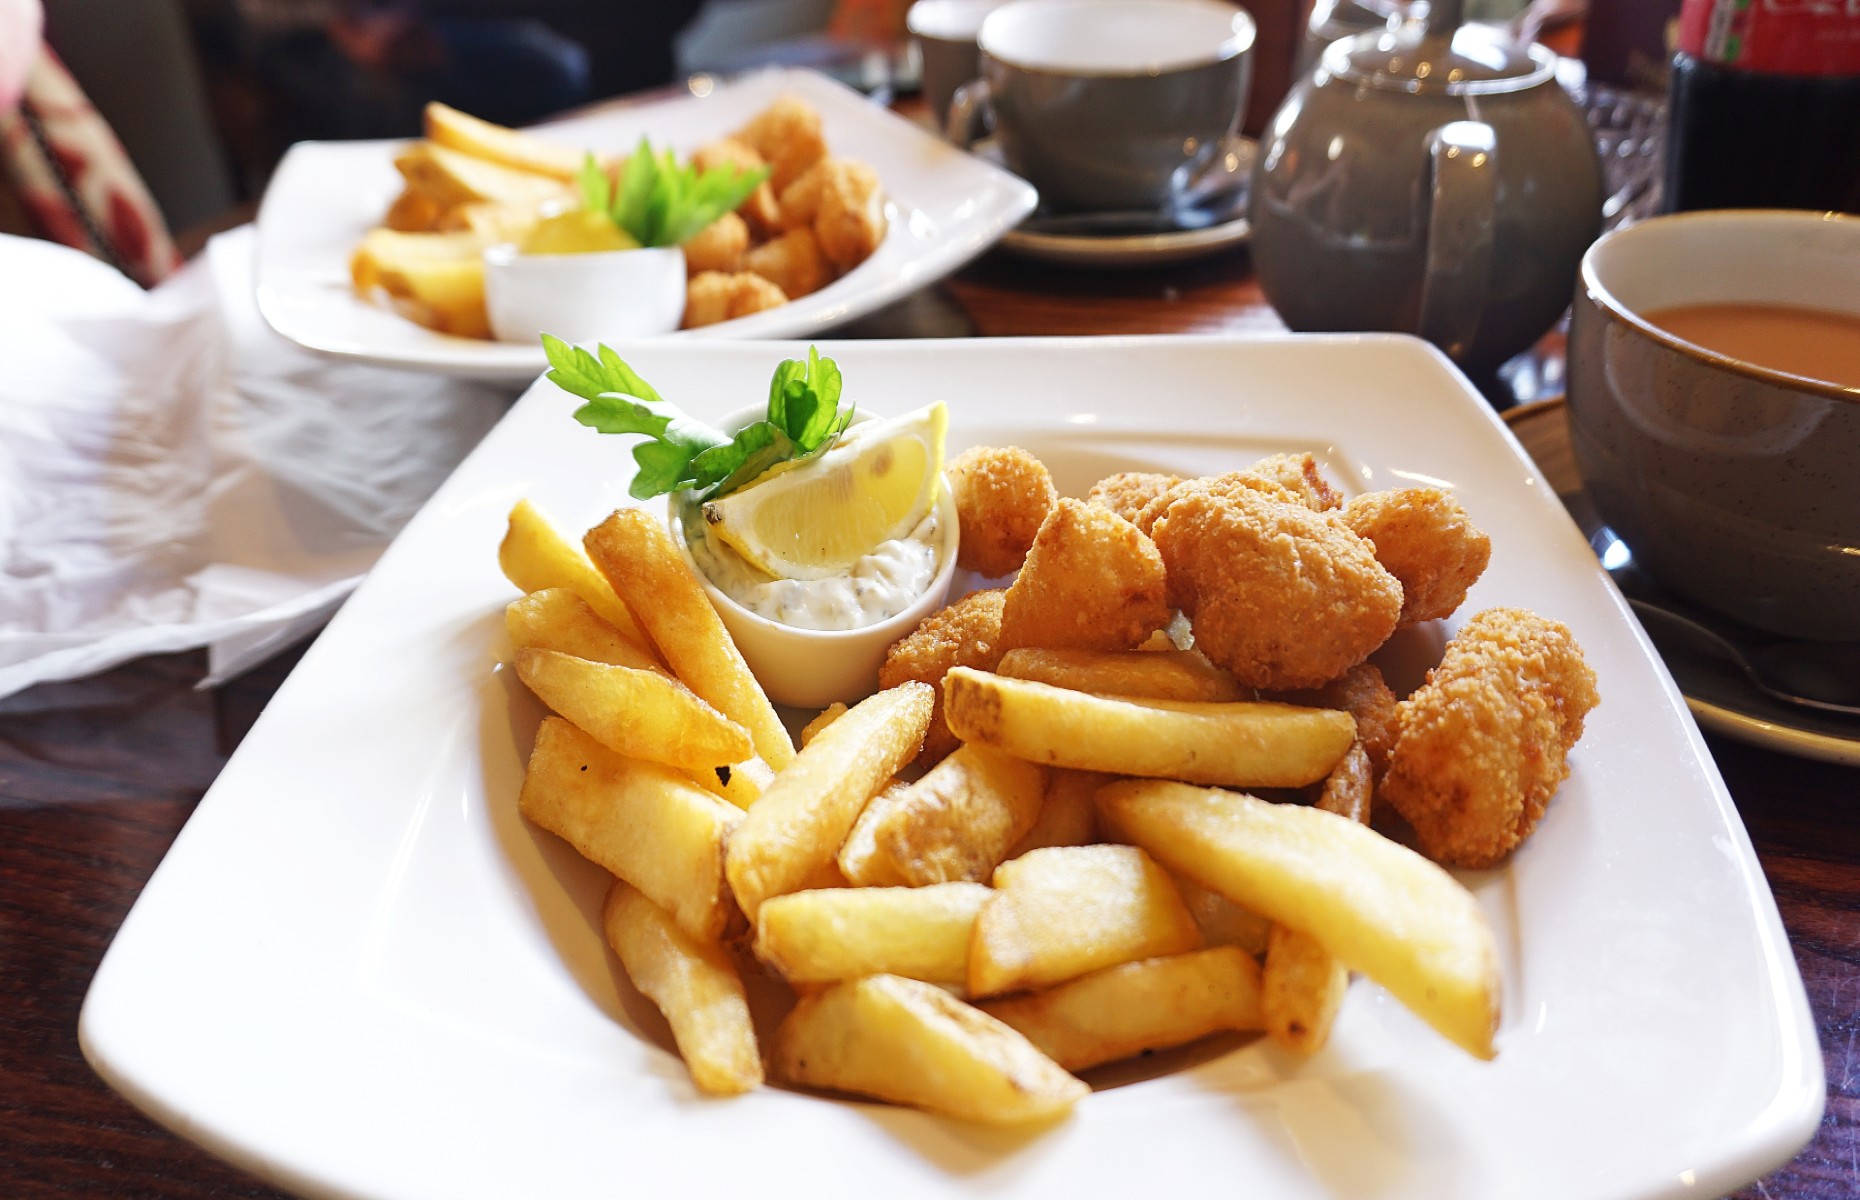 Scampi and chips (Image: Tana888/Shutterstock)